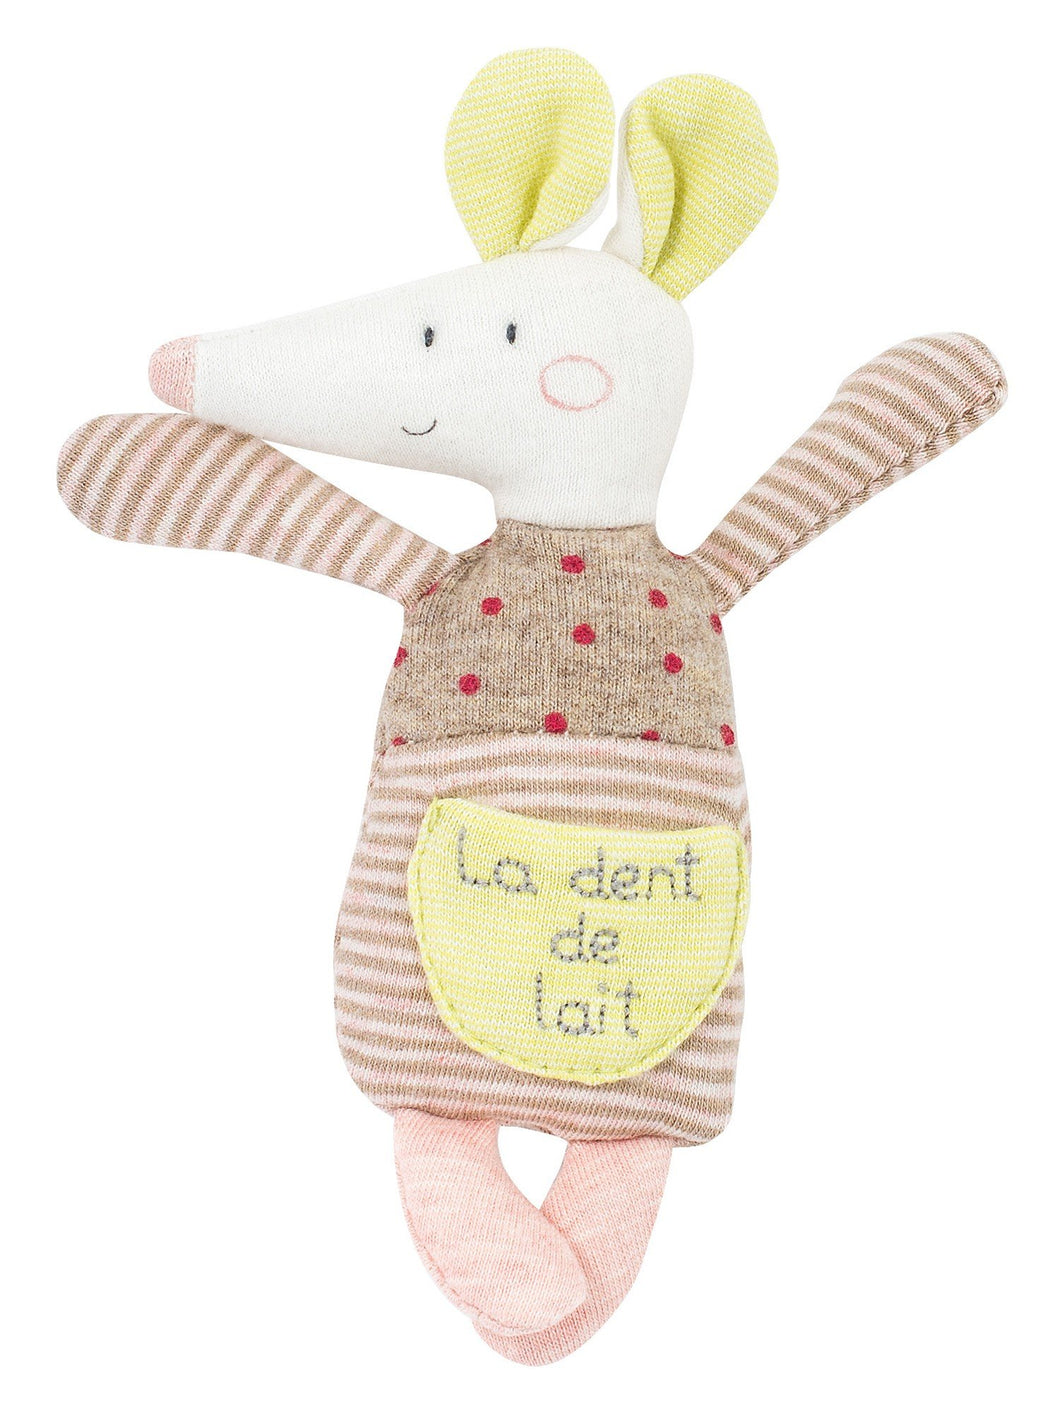 Moulin Roty Milk Mouse Tooth Box  - Les Petits Dodos